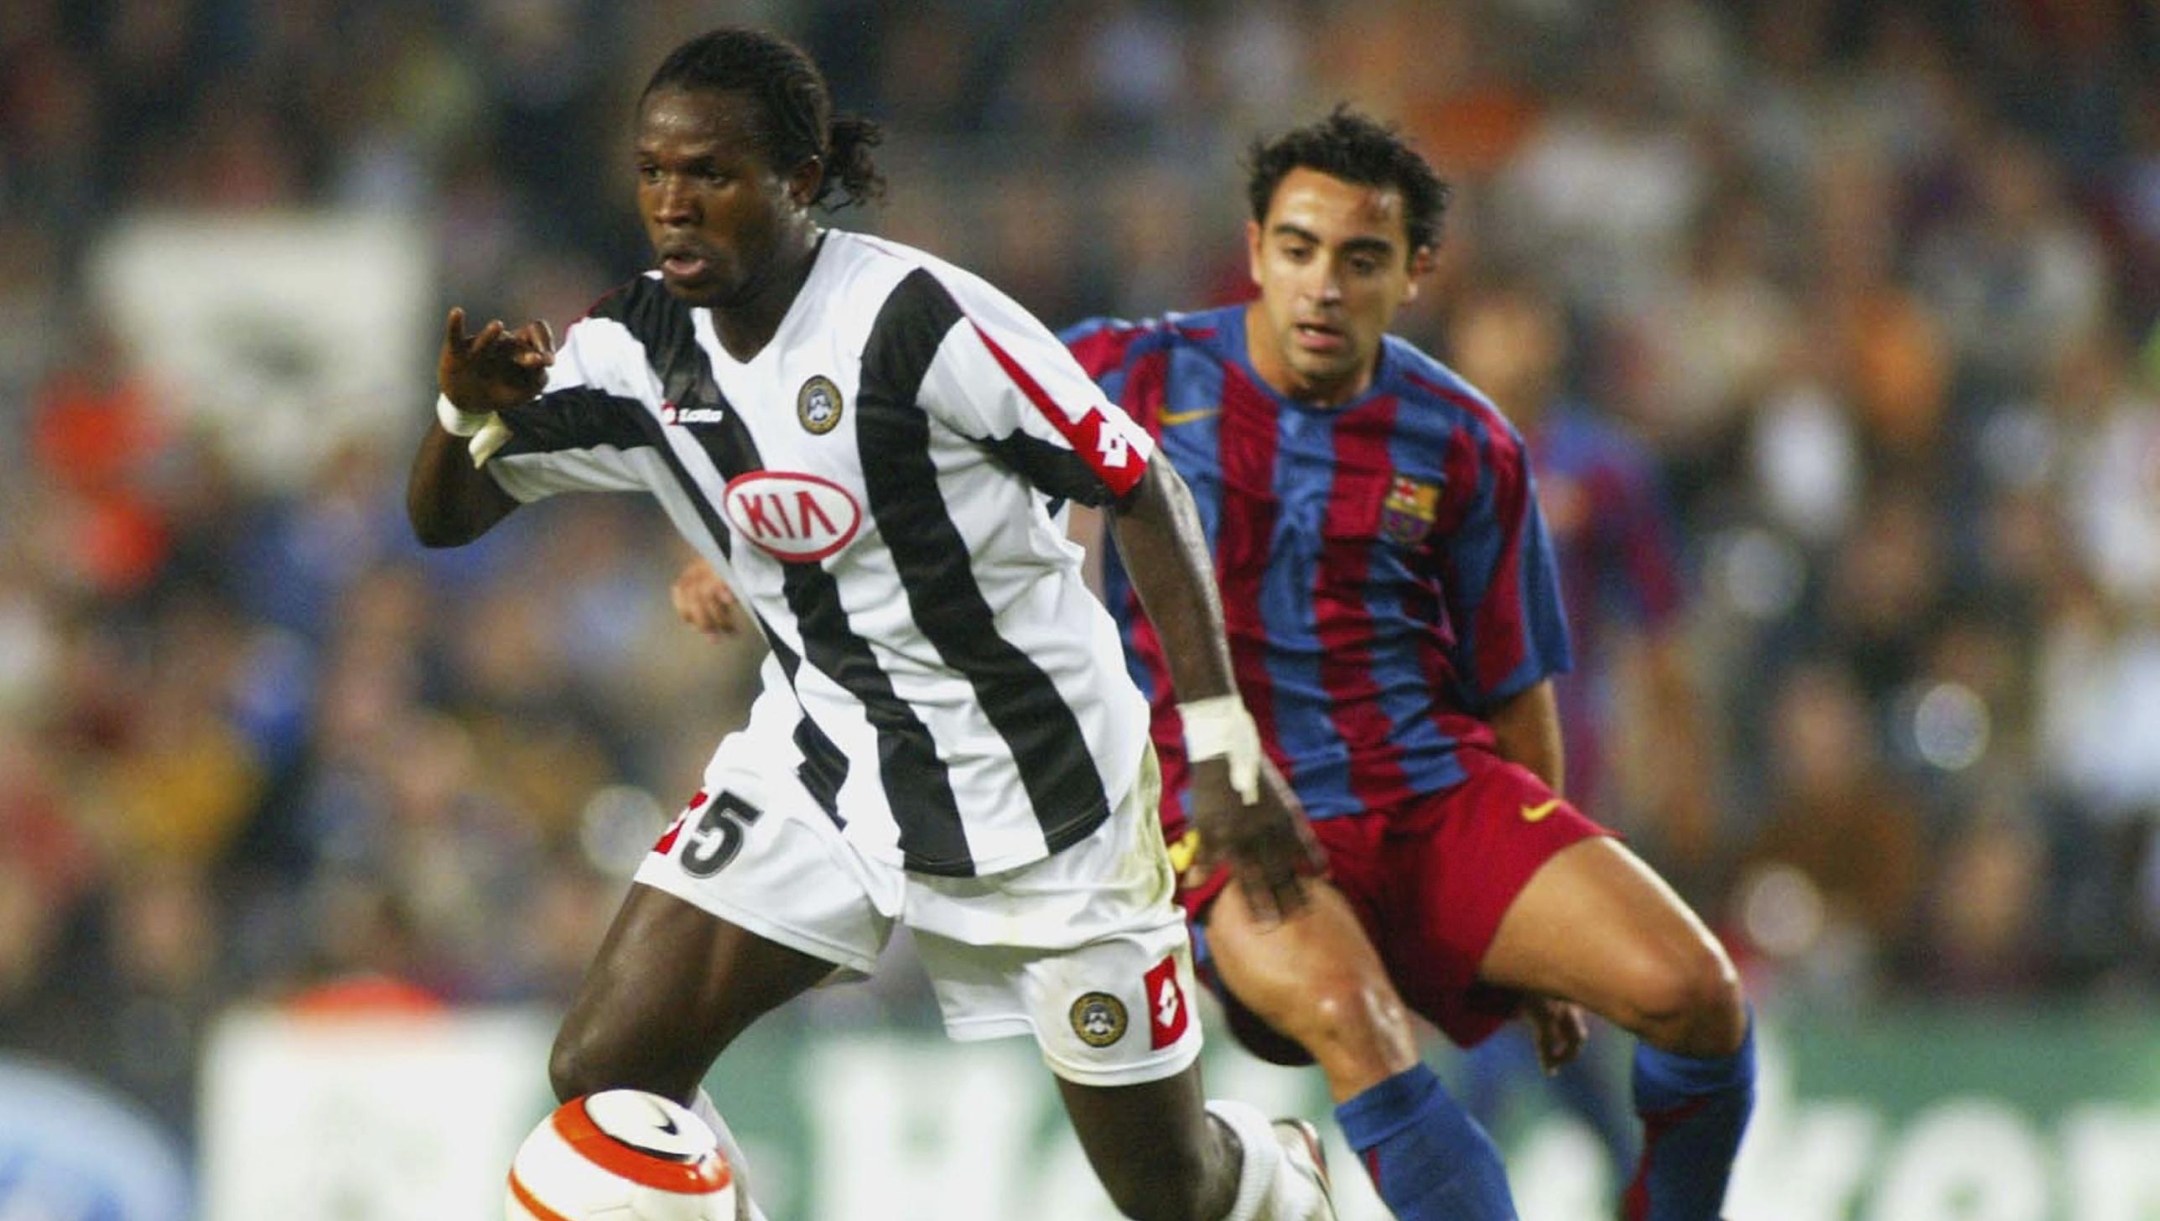 BARCELONA, SPAIN - SEPTEMBER 27:  Christian Obodo of Udinese and Xavi Hernandez of FC Barcelona compete for the ball during the UEFA Champions League Group A match between FC Barcelona and Udinese played at the Camp Nou stadium on September 27, 2005 in Barcelona, Spain. (Photo by Luis Bagu/Getty Images) *** Local Caption *** Christian Obodo;Xavi Hernandez